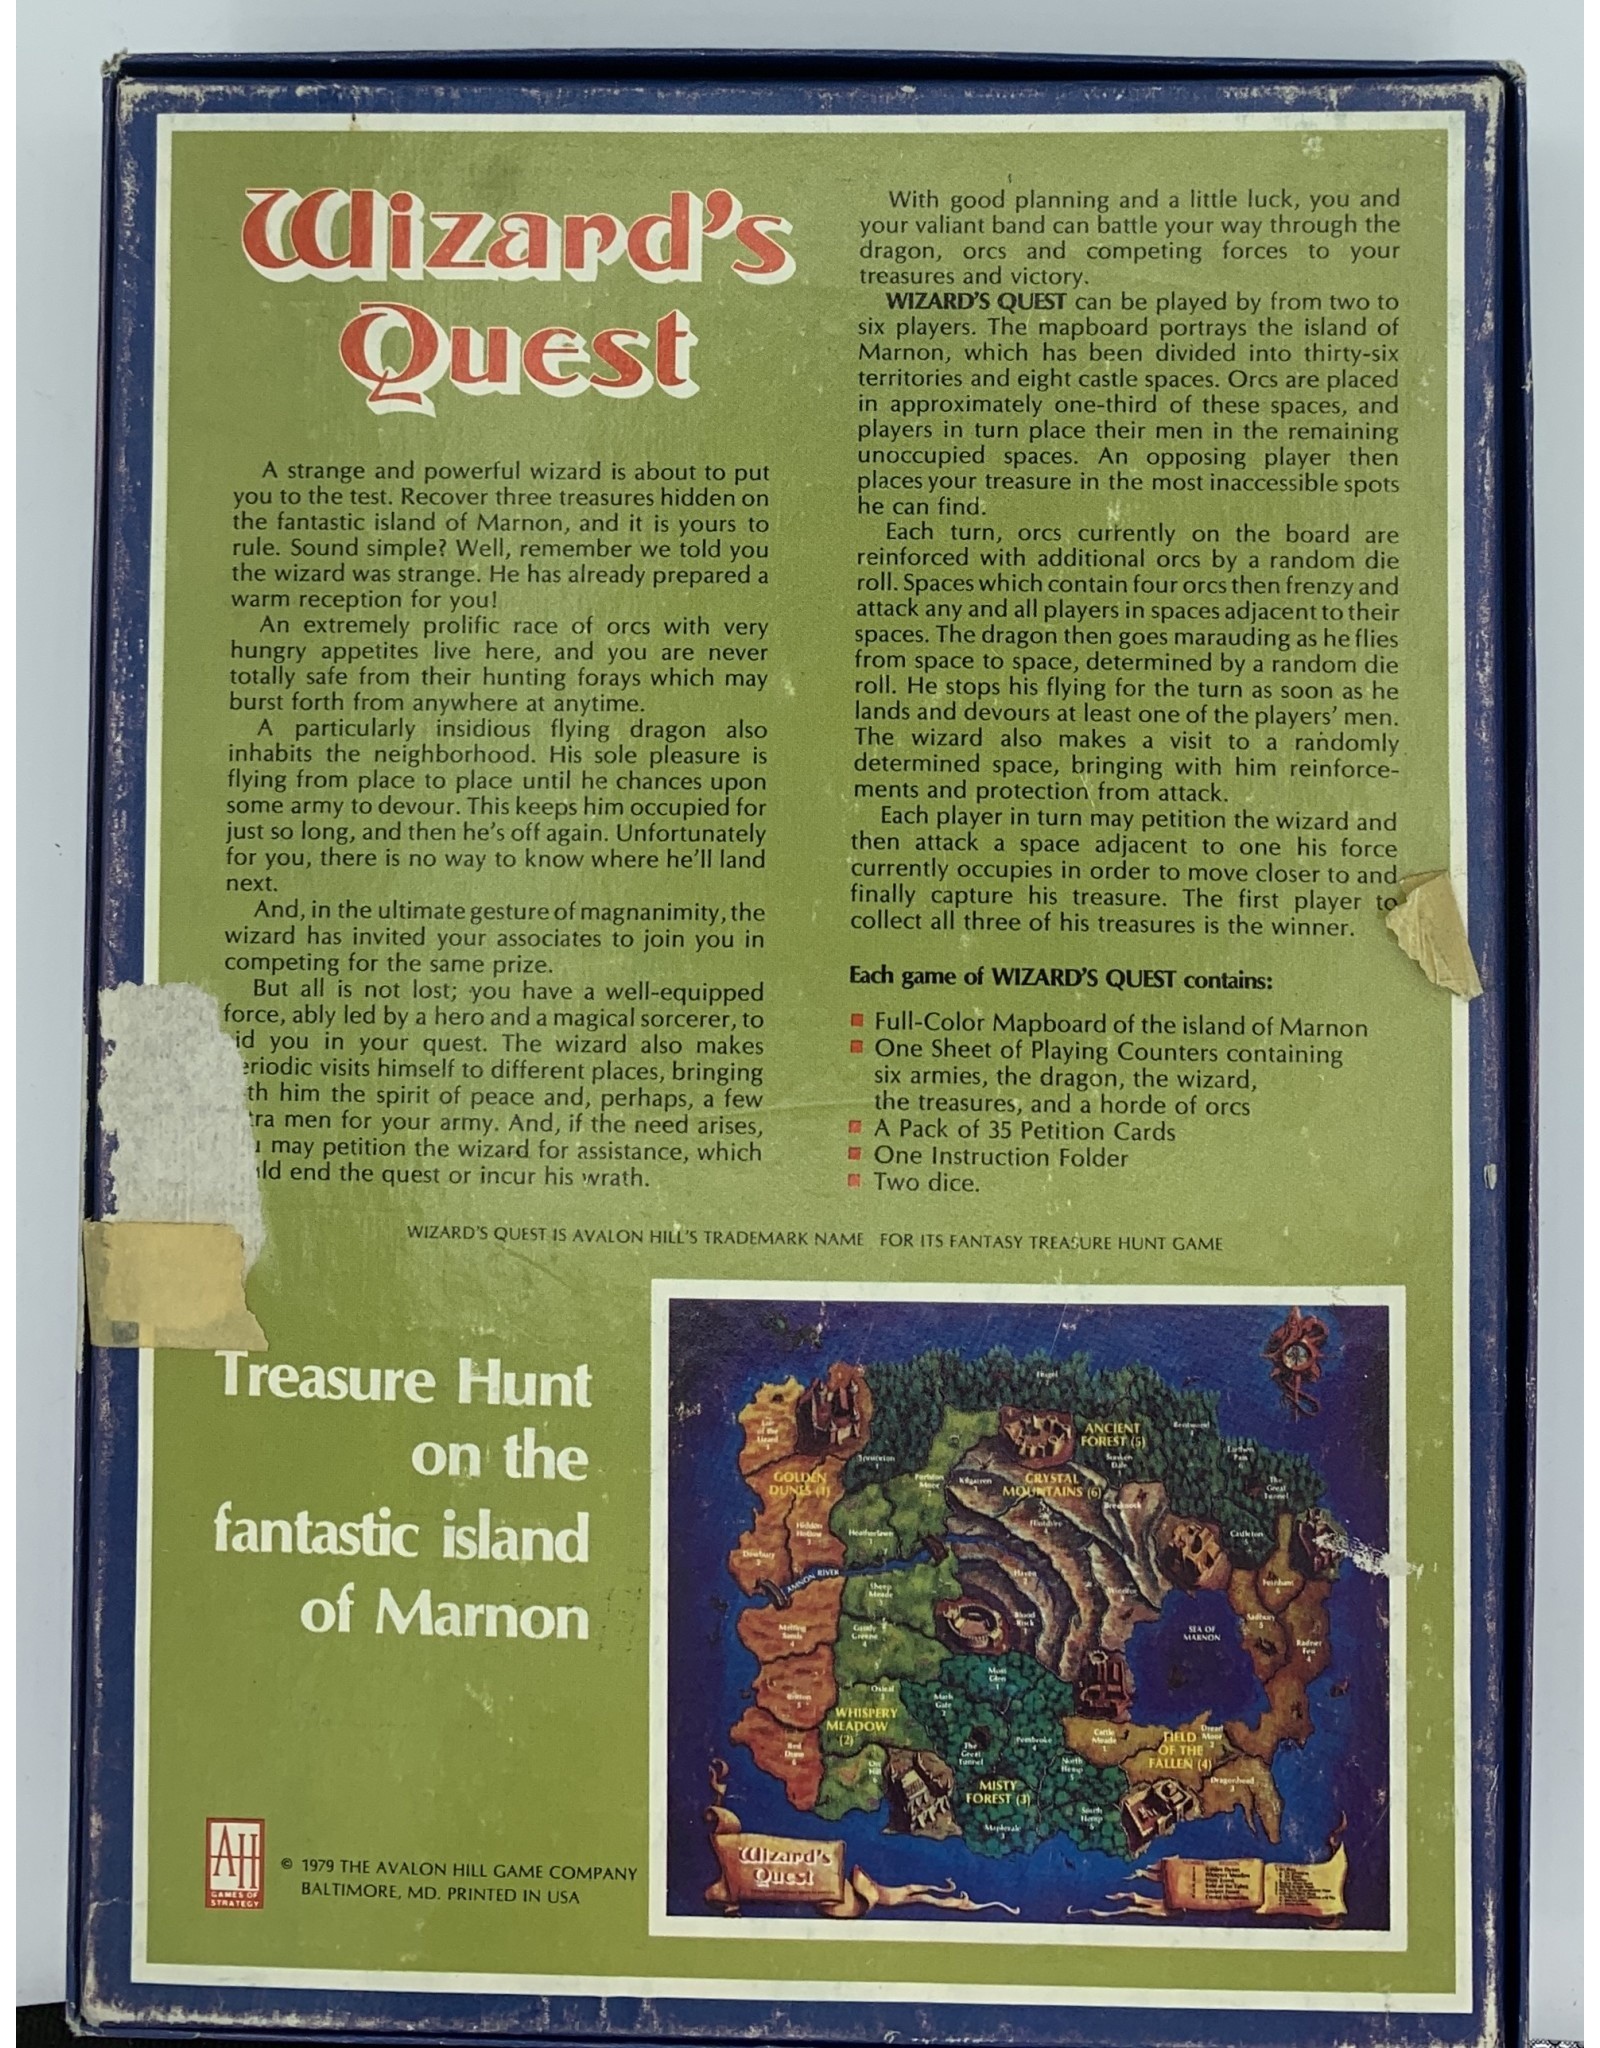 Avalon Hill Game Company Wizard's Quest (1979)